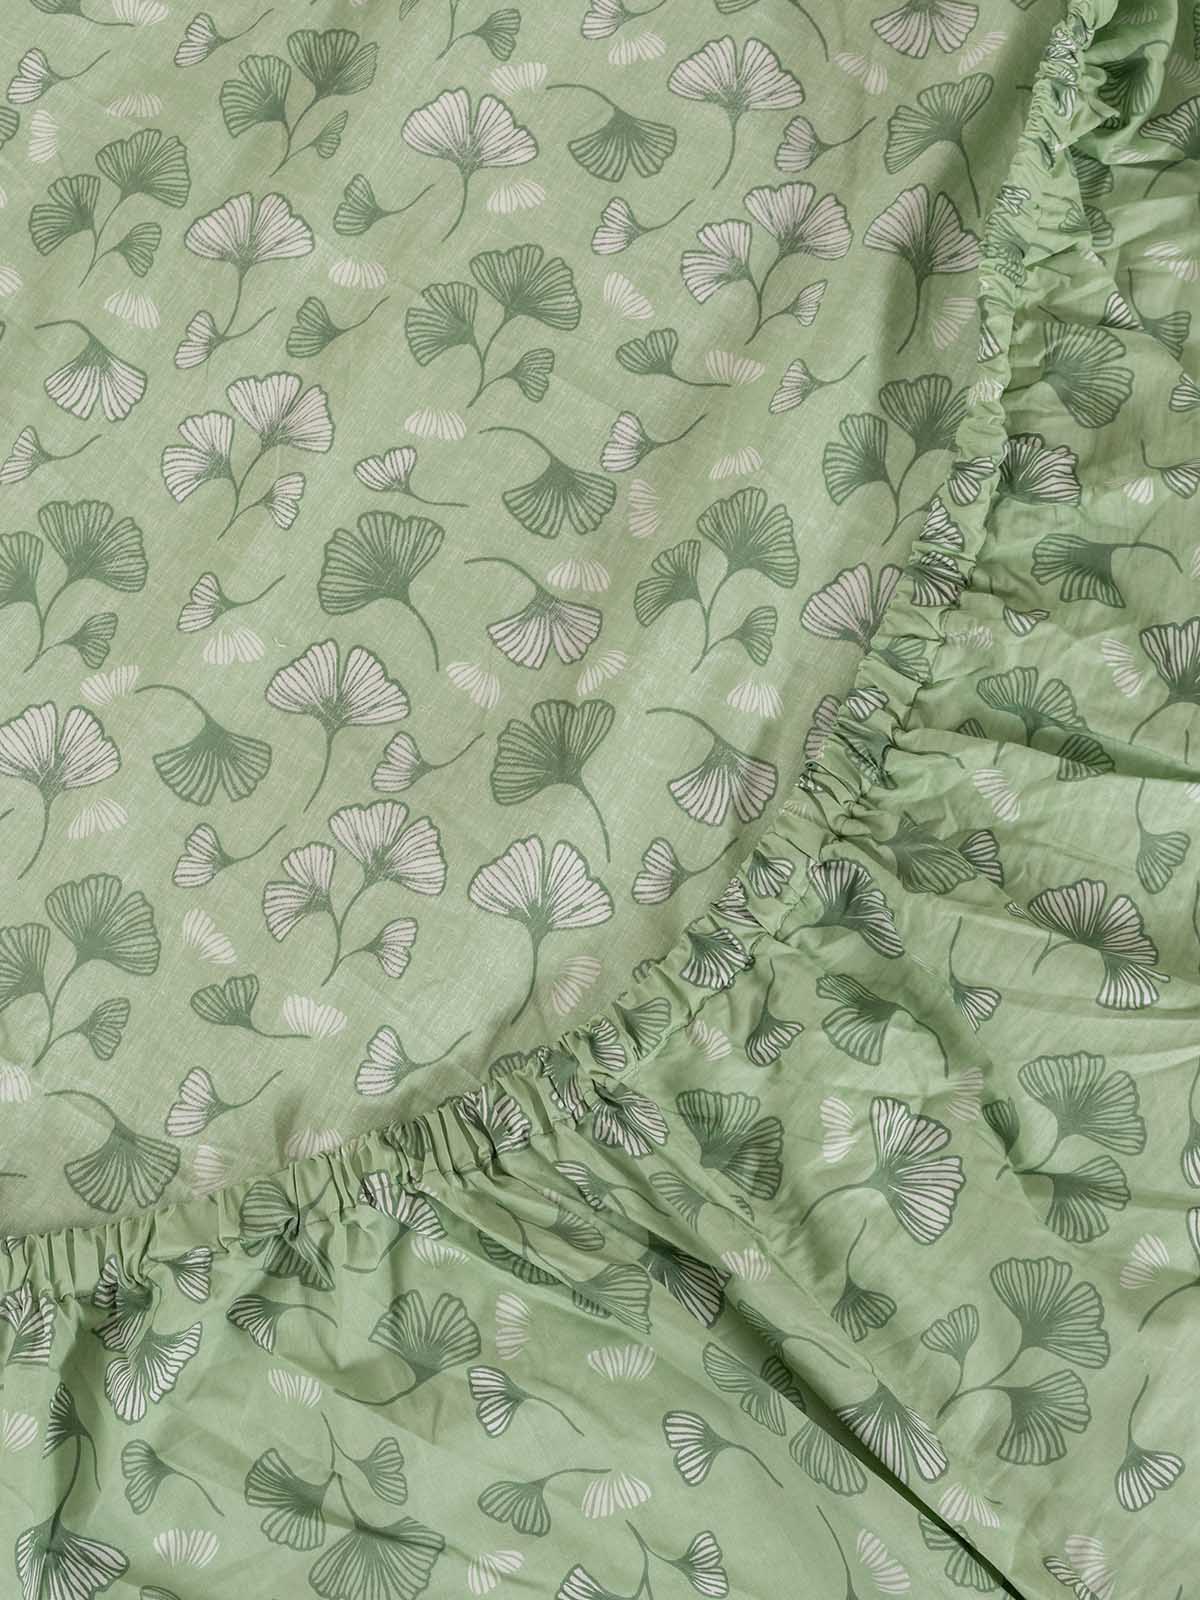 Gingko Leaves Printed Cotton Fitted Sheet - Green